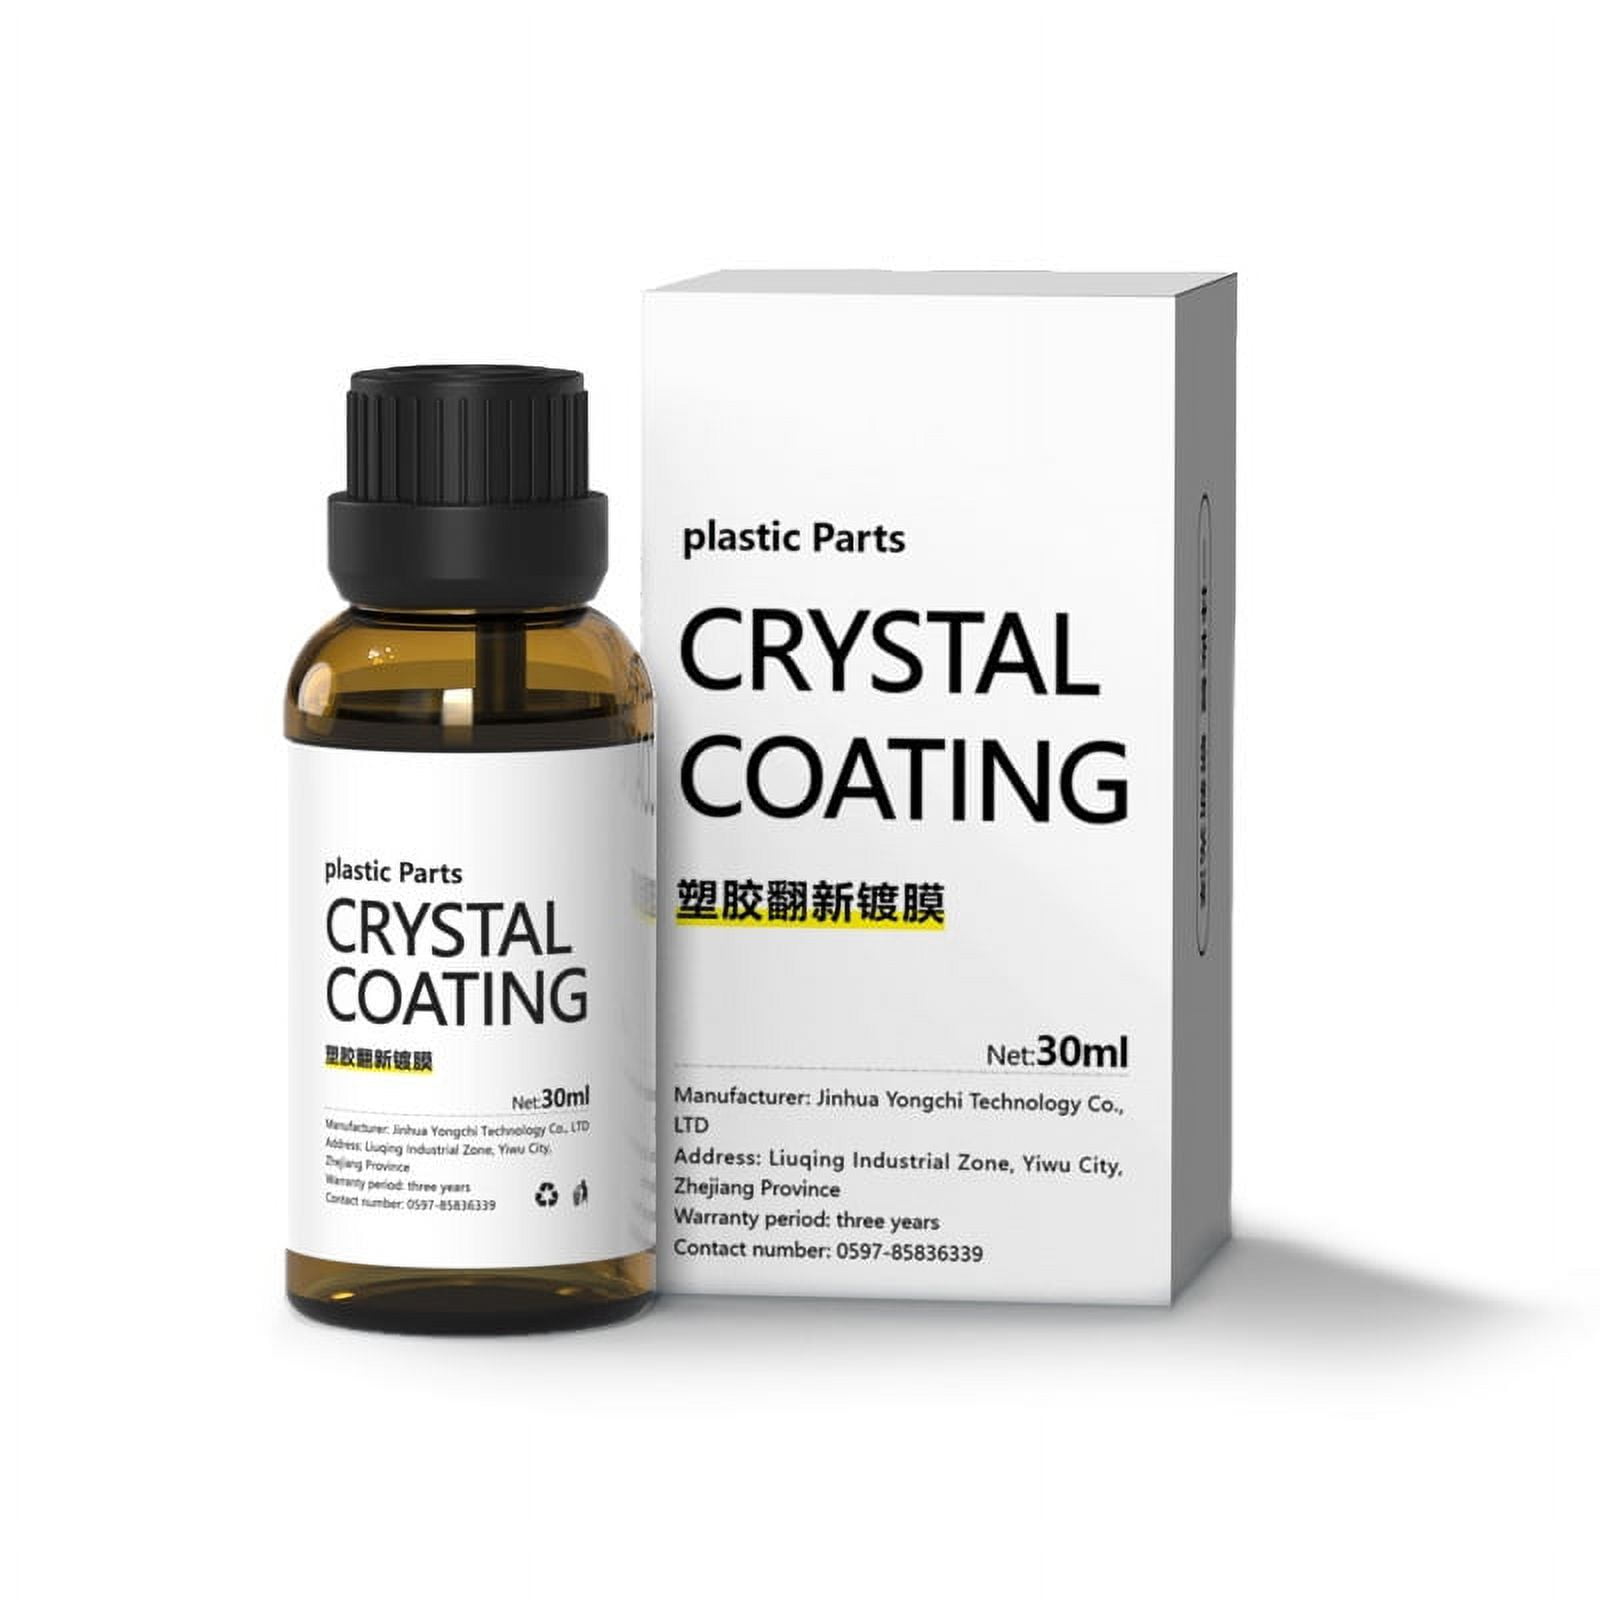  VYOFLA Plastic Parts Crystal Coating - 30ml Easy to